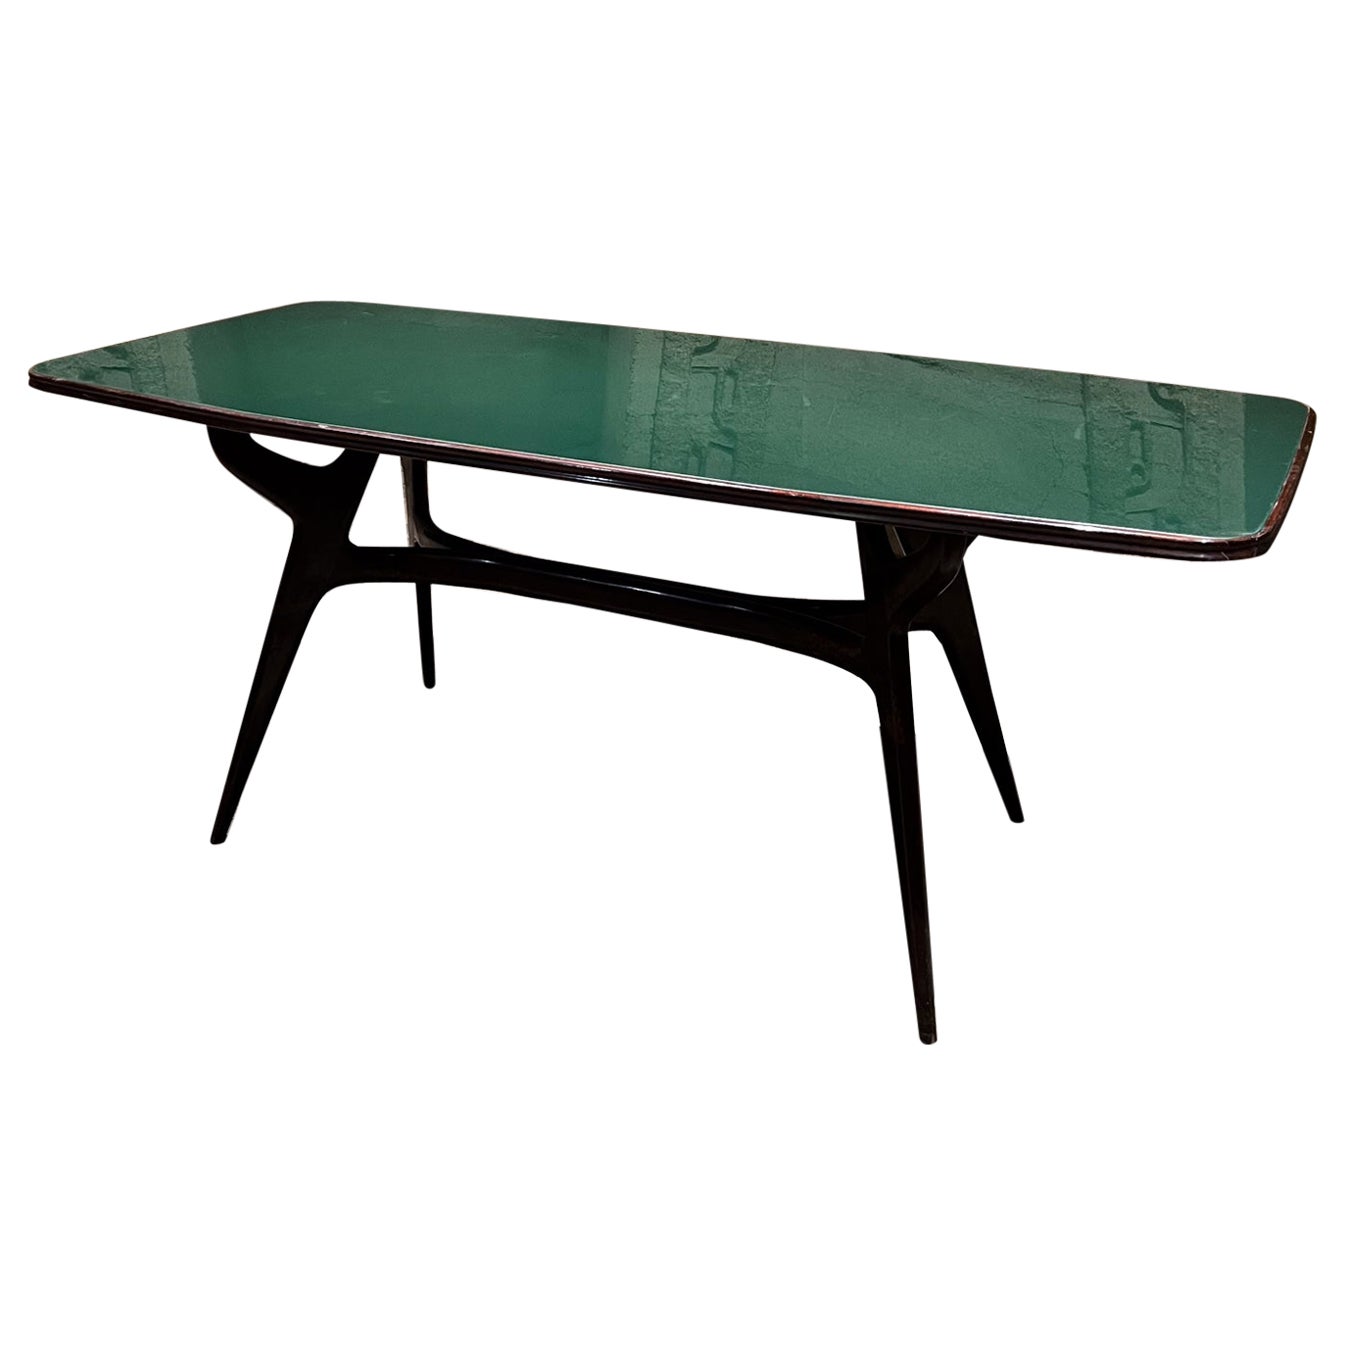 1950s Modernist Green Dining Table after Ico Parisi Italy For Sale